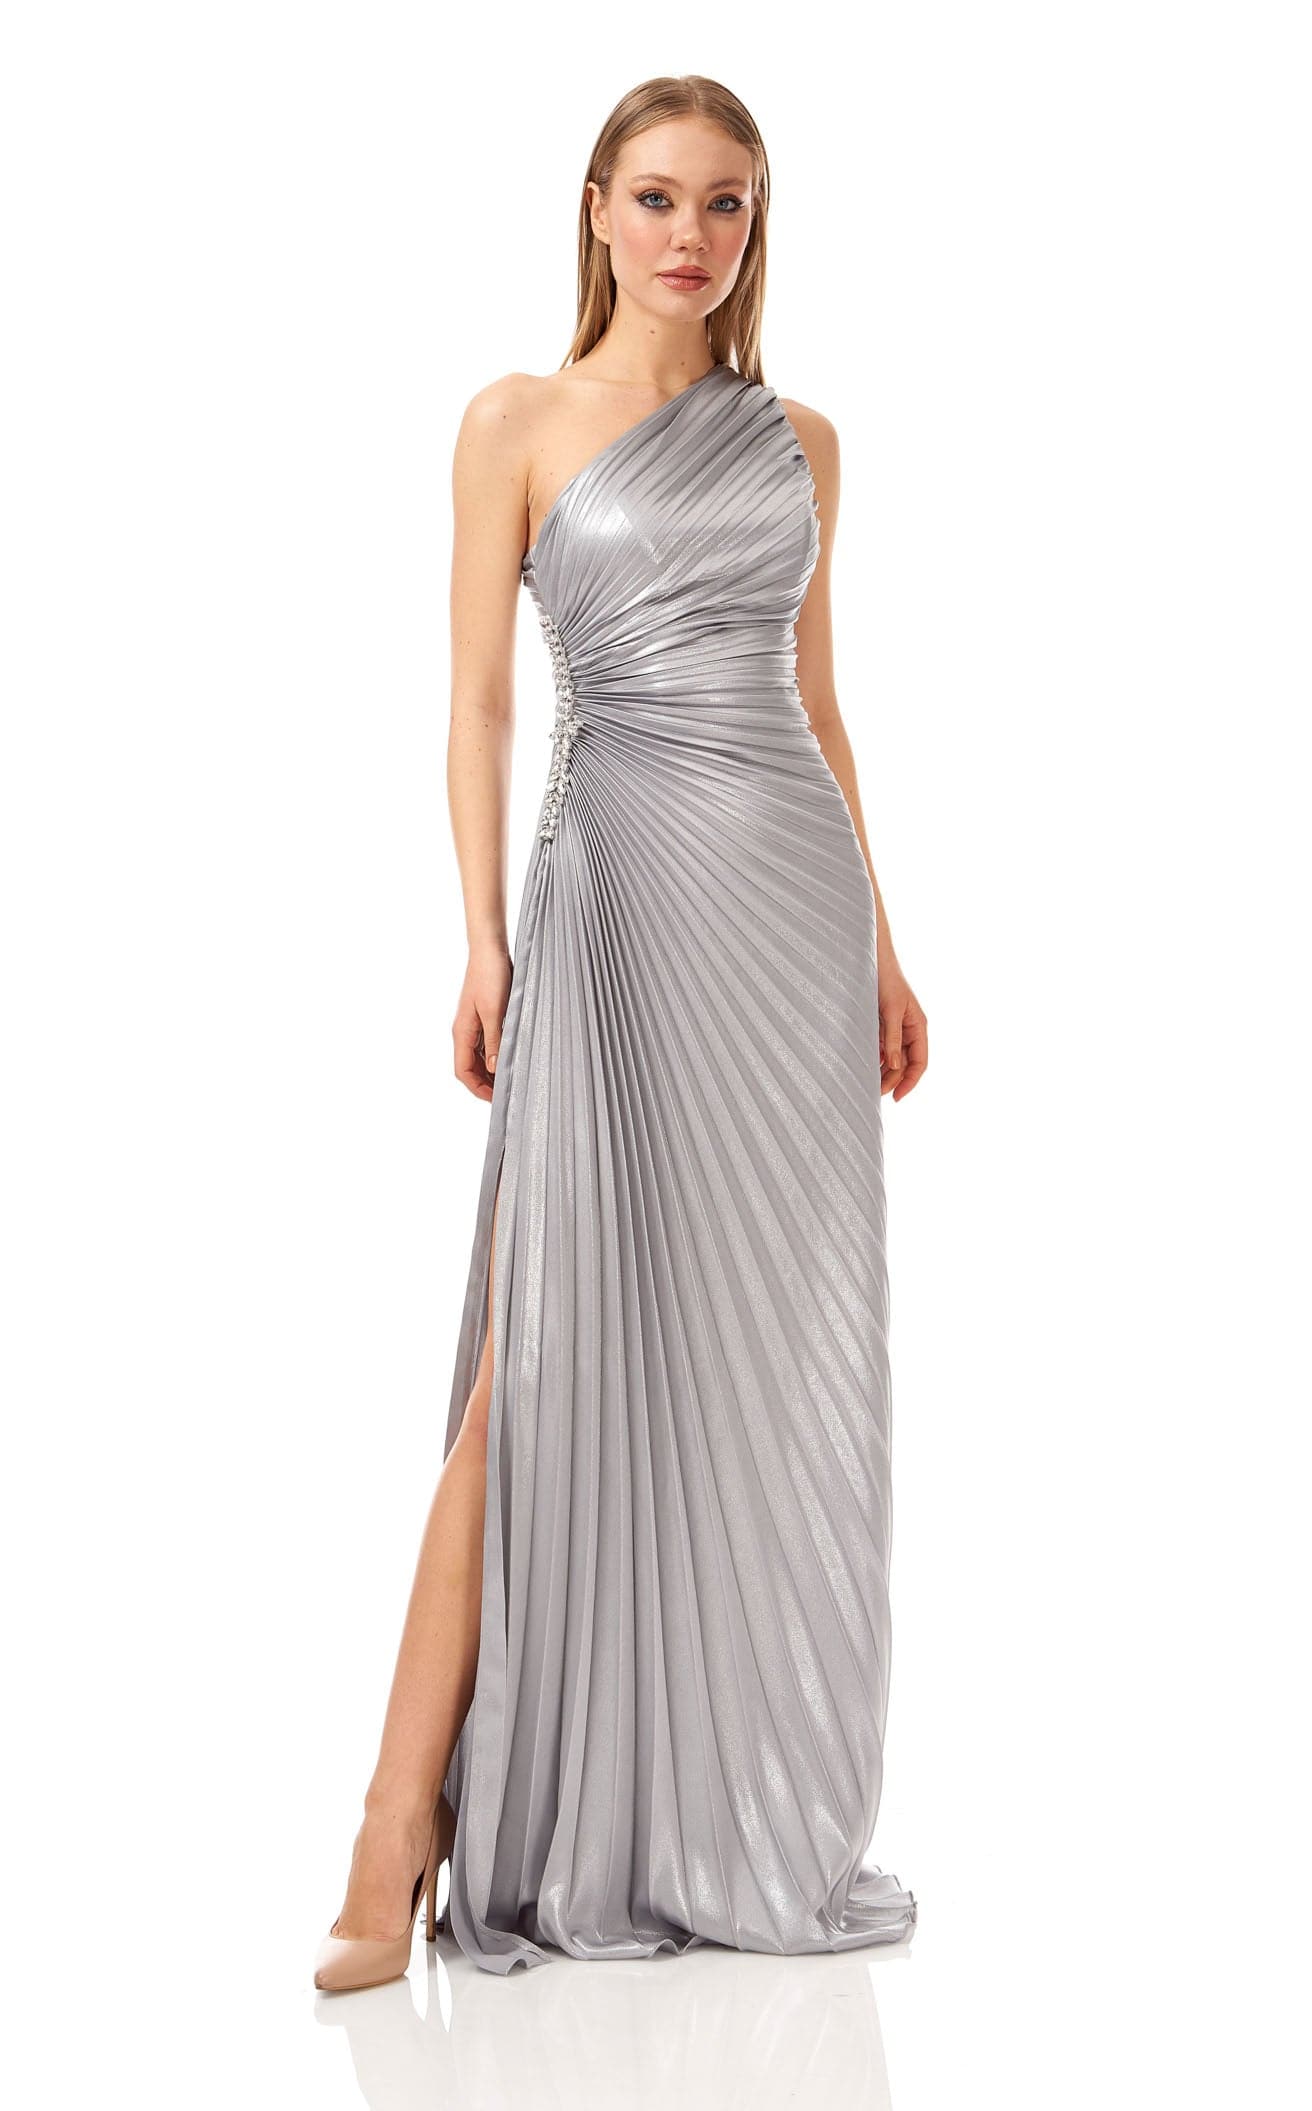 10 Best Silver Mother-of-the-Bride and -Groom Dresses